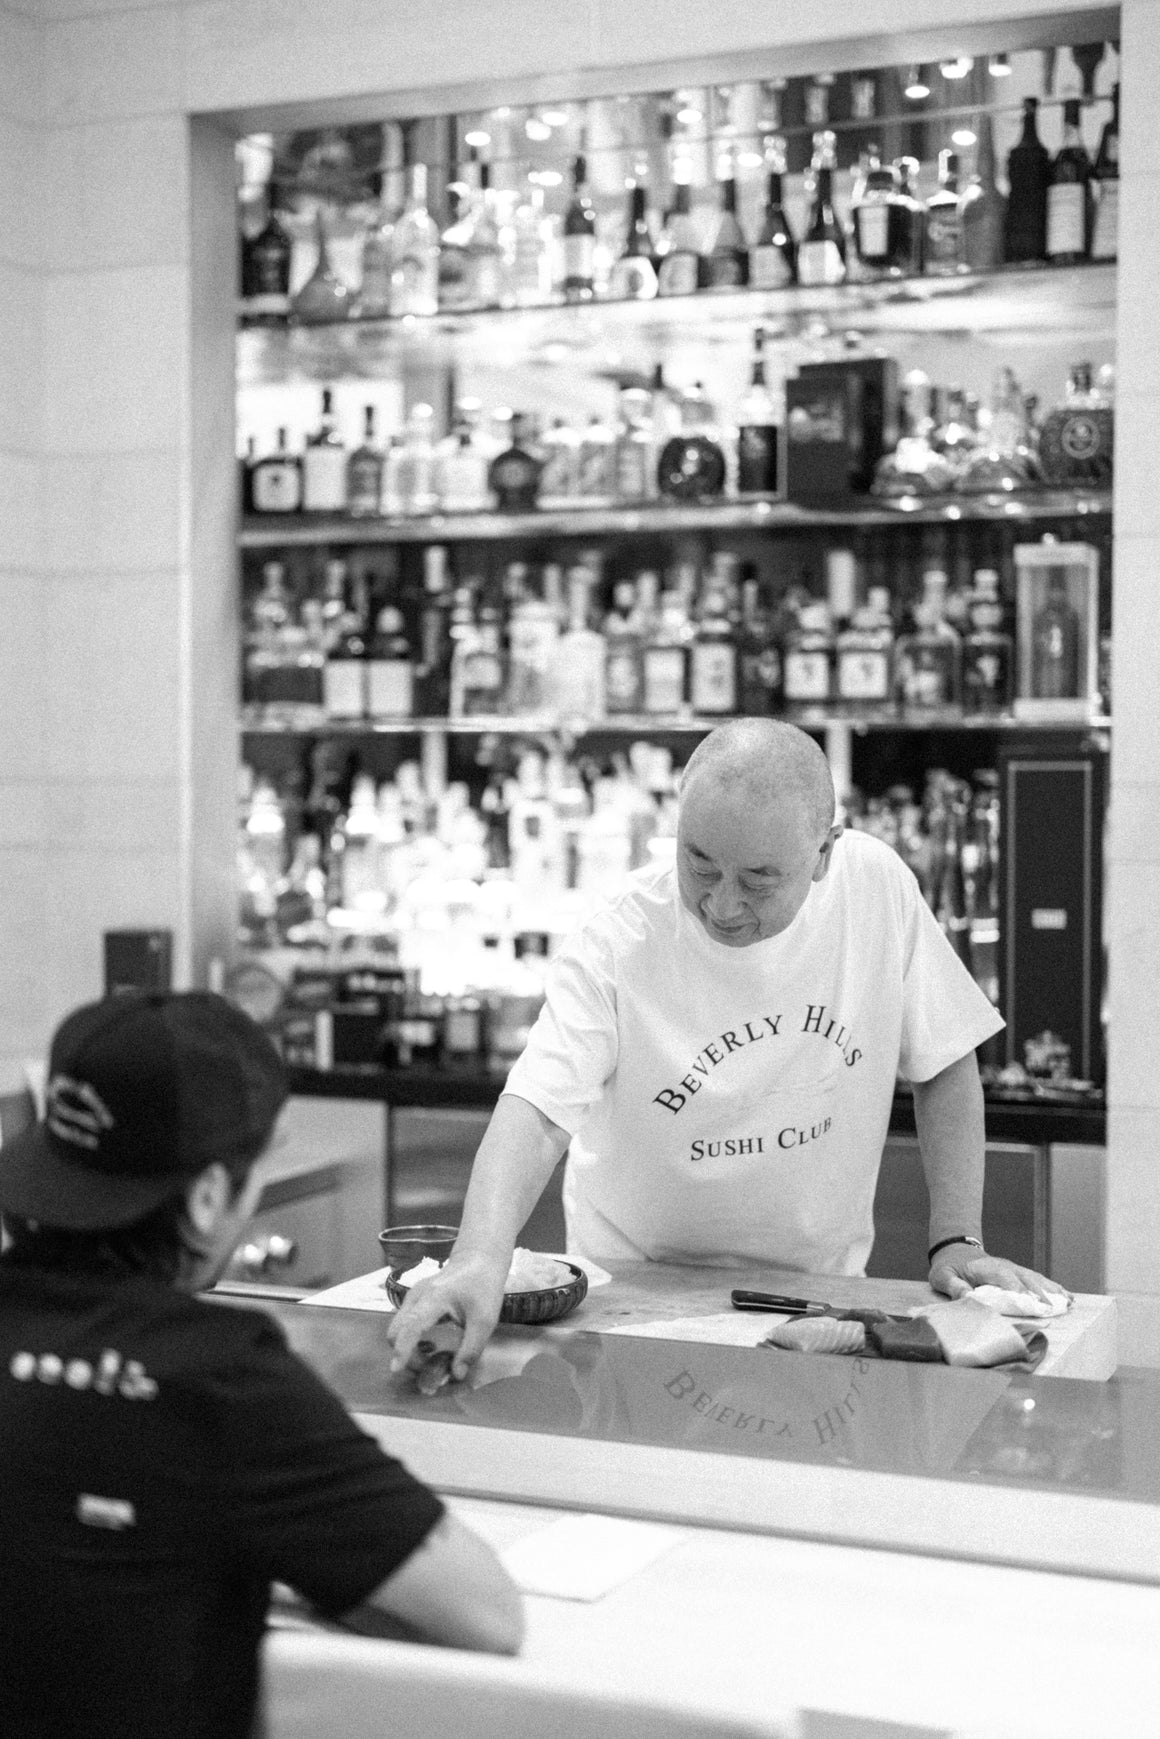 Beverly Hills Sushi Club STAMPD Tシャツ